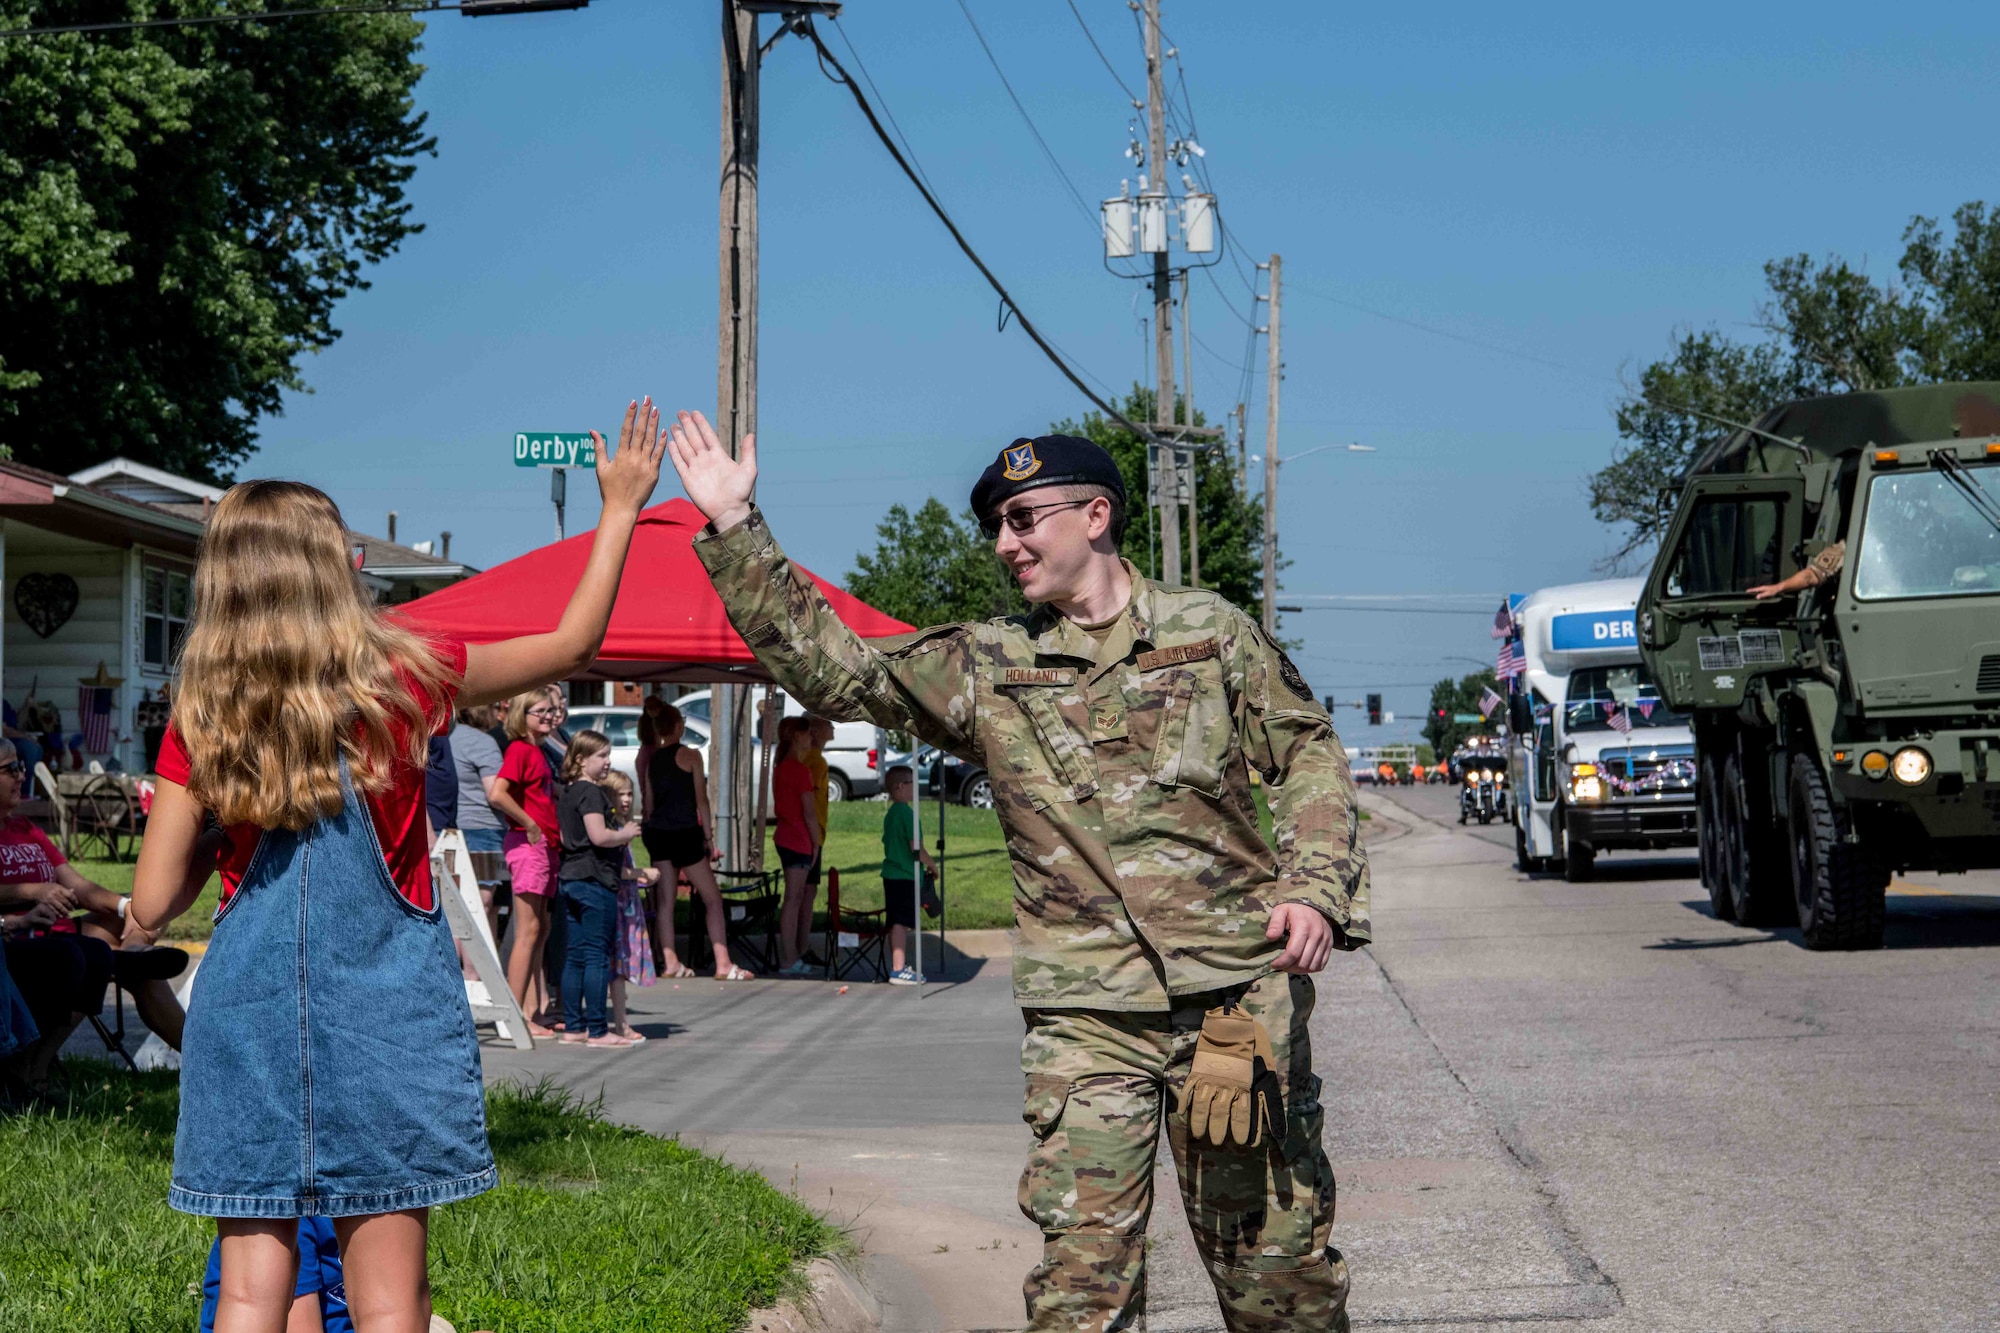 Senior Airman Brandon Holland, 22nd Security Forces Squadron patrolman, high fives a parade attendee during Derby’s Independence Day parade July 3, 2021, in Derby, Kansas. McConnell Air Force Base had military members from the 184th Wing, 22nd Civil Engineer Squadron and 22nd SFS, participate in the annual parade for the city of Derby. (U.S. Air Force photo by Senior Airman Marc A. Garcia)